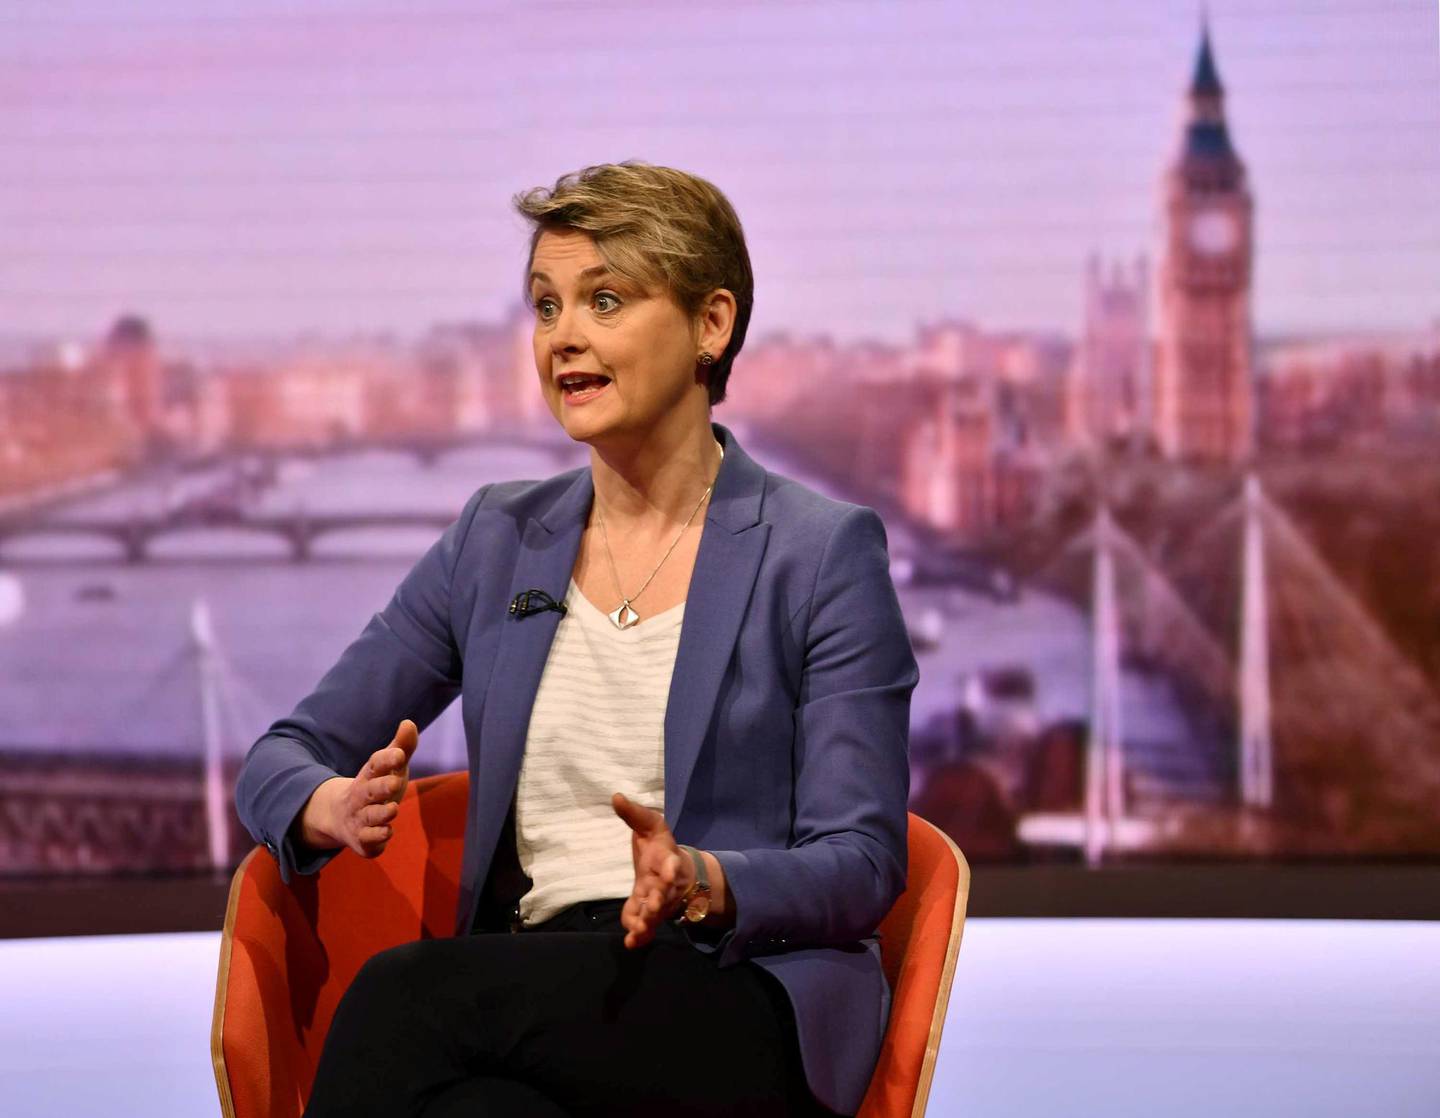 Britain's Normanton MP Yvette Cooper appears on BBC TV's The Andrew Marr Show in London, Britain January 27, 2019. Jeff Overs/BBC/Handout via REUTERS. THIS IMAGE HAS BEEN SUPPLIED BY A THIRD PARTY. NO RESALES. NO ARCHIVES